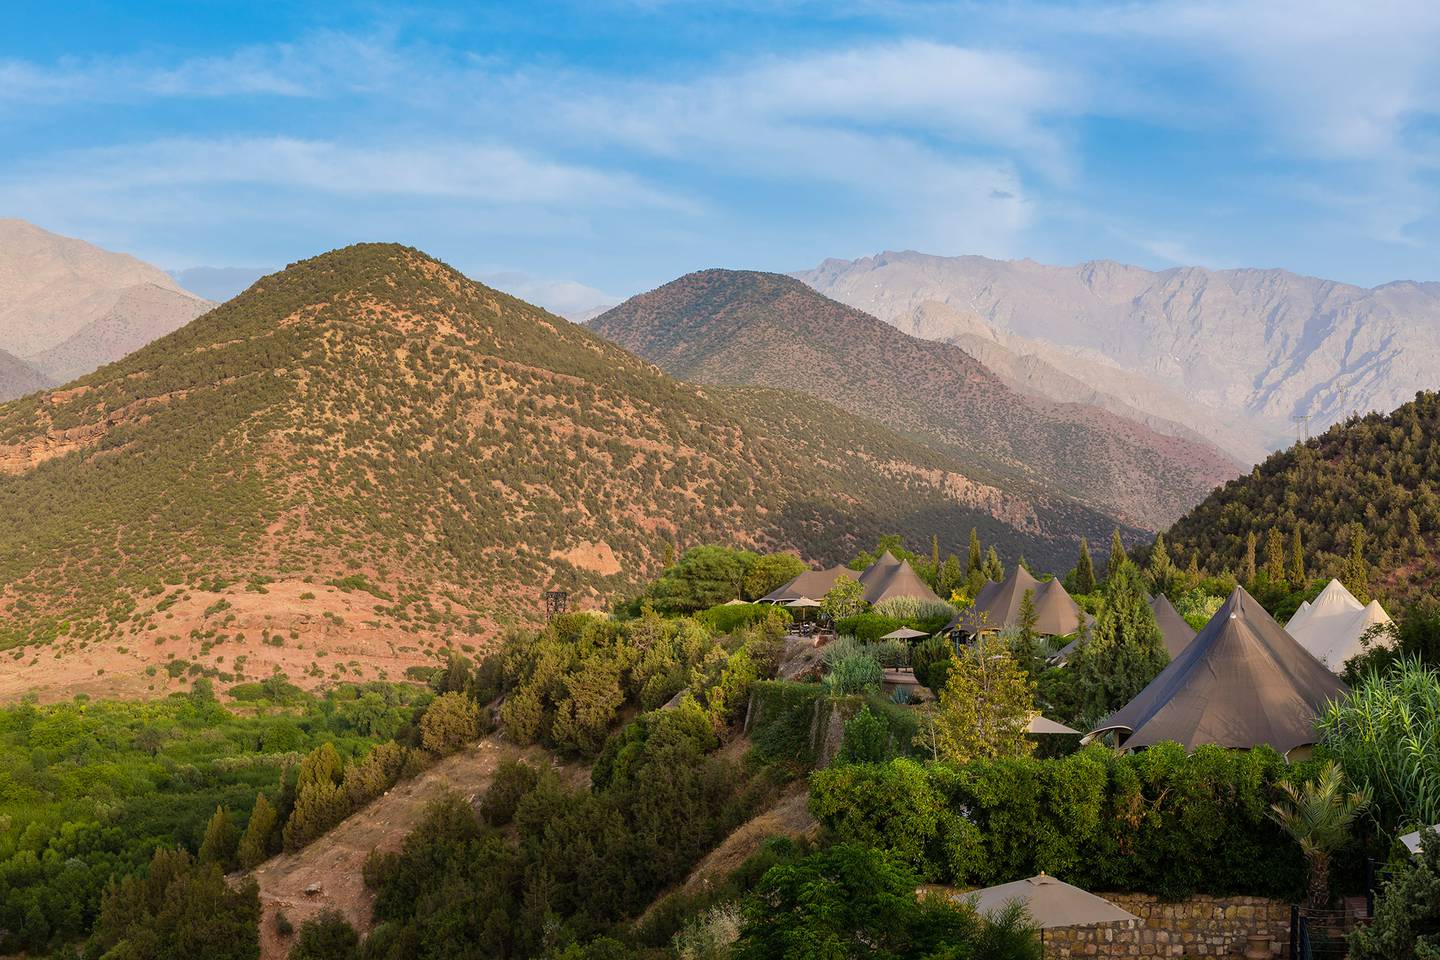 The Atlas Mountains are accessible year-round. Photo: Kasbah Tamadot